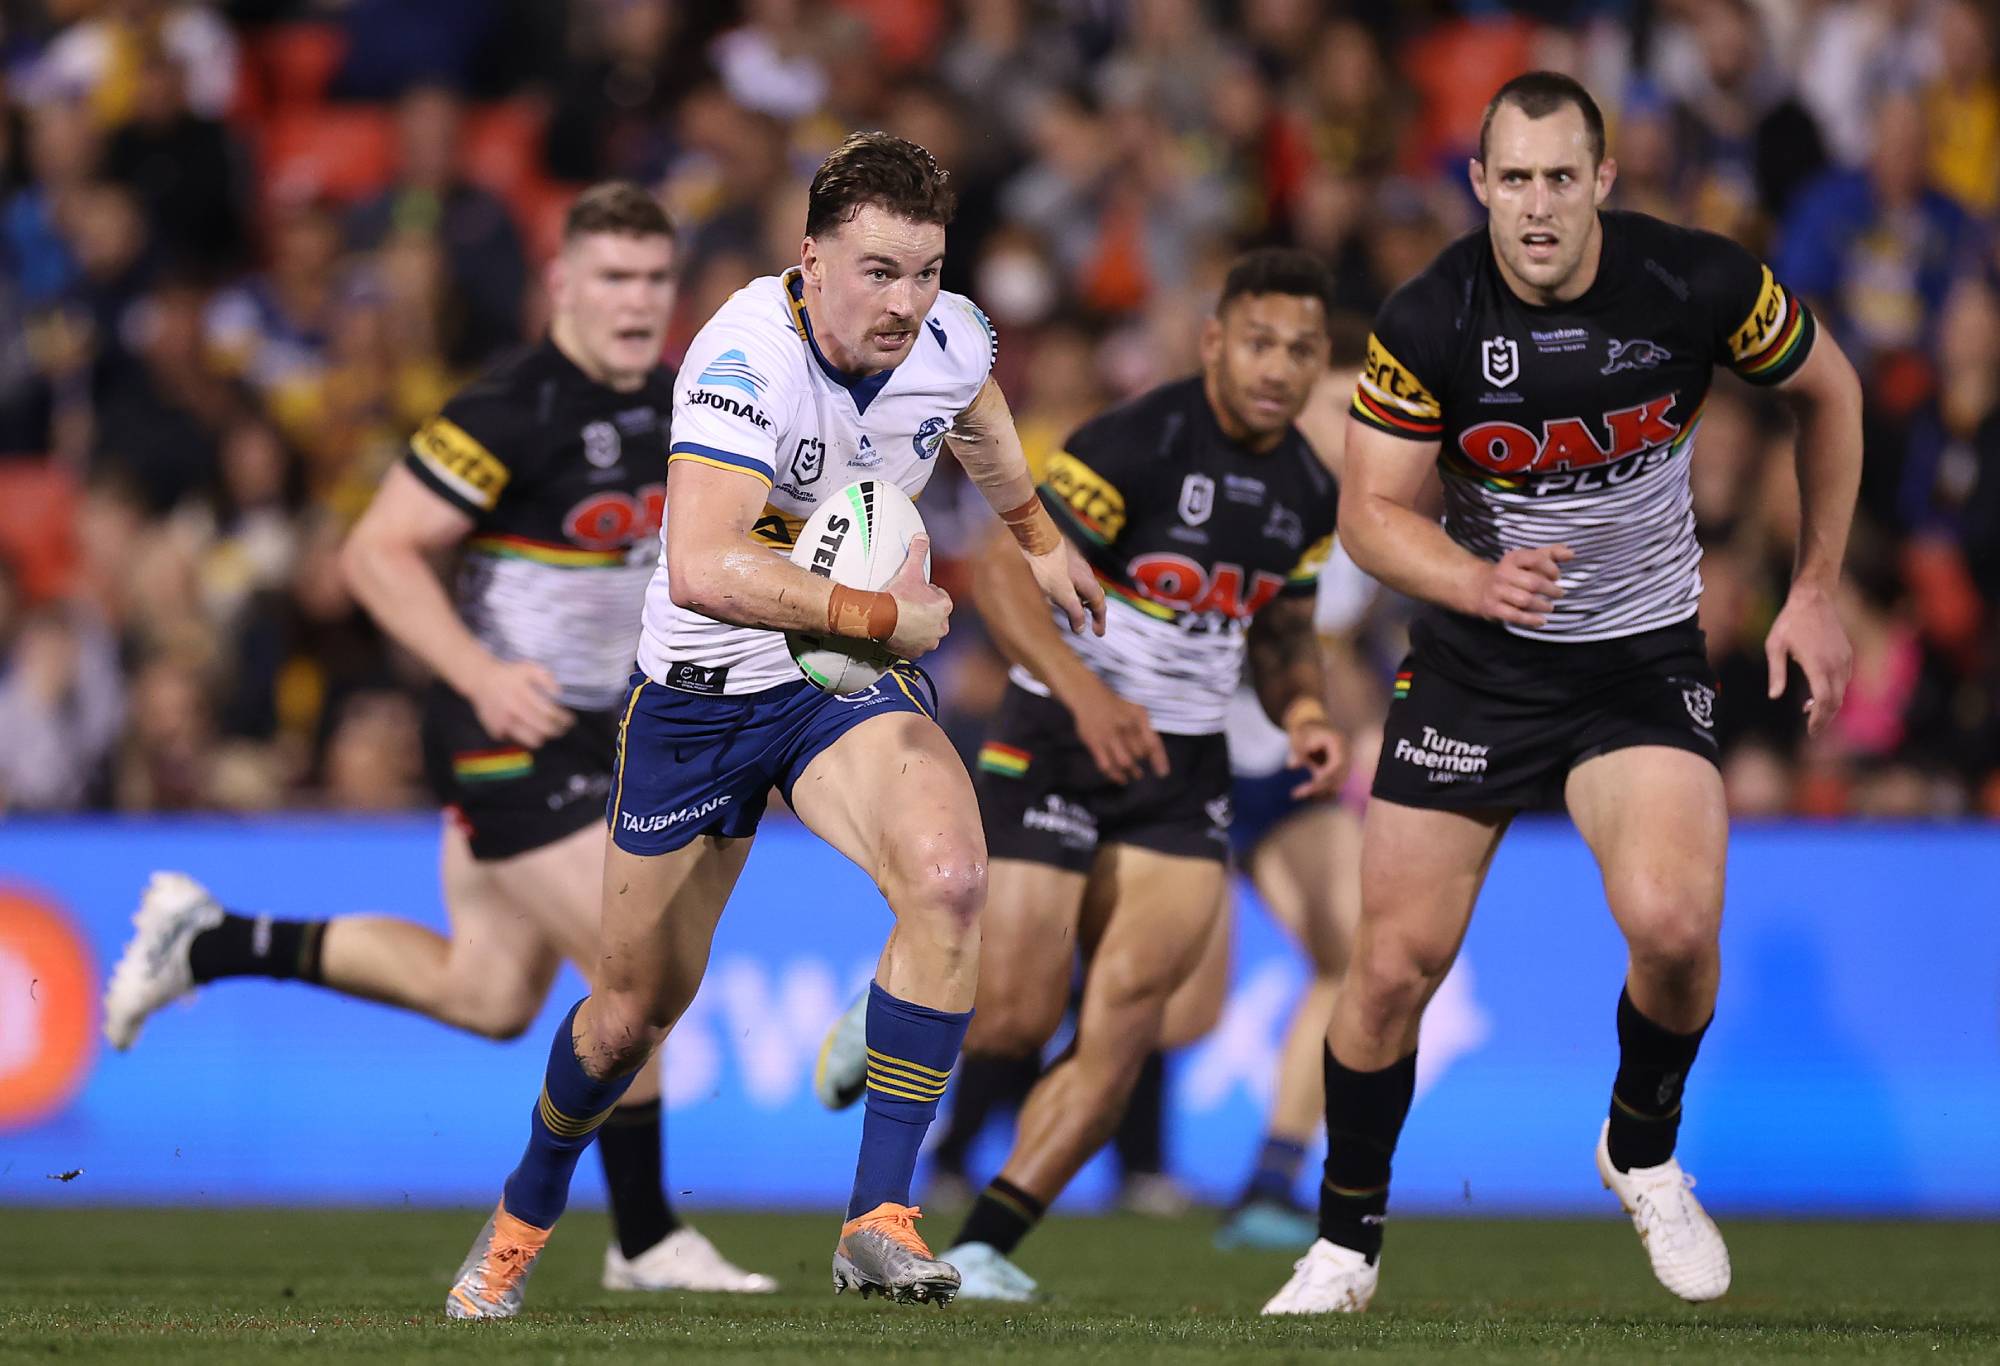 PENRITH, AUSTRALIA - SEPTEMBER 09: Clinton Gutherson of the Eels makes a break during the NRL Qualifying Final match between the Penrith Panthers and the Parramatta Eels at BlueBet Stadium on September 09, 2022 in Penrith, Australia. (Photo by Mark Kolbe/Getty Images)